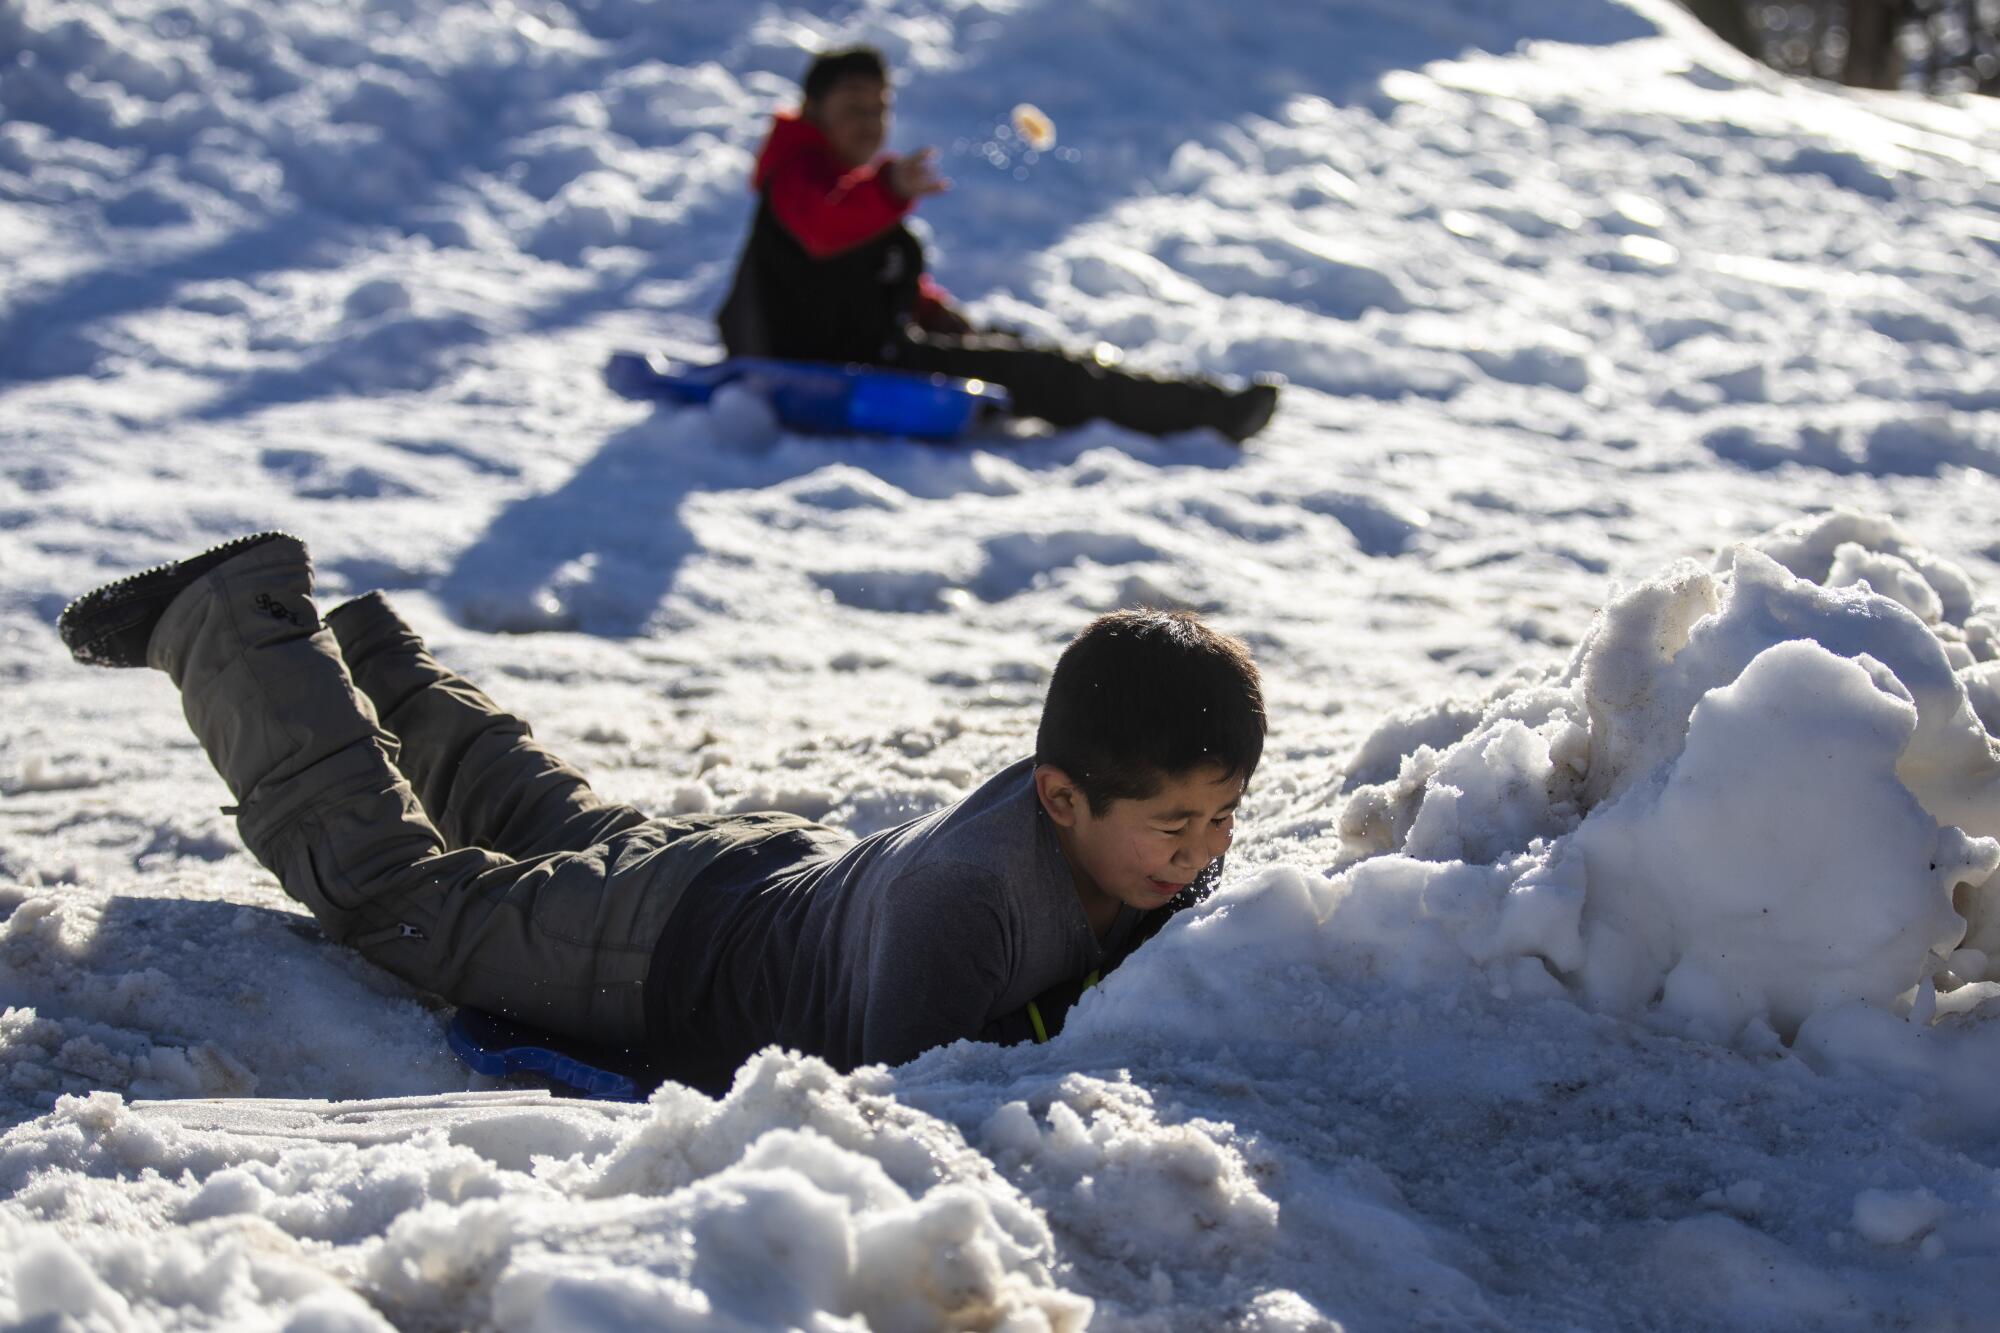 Two boys, one seated and another on his belly, ride sleds on packed snow.